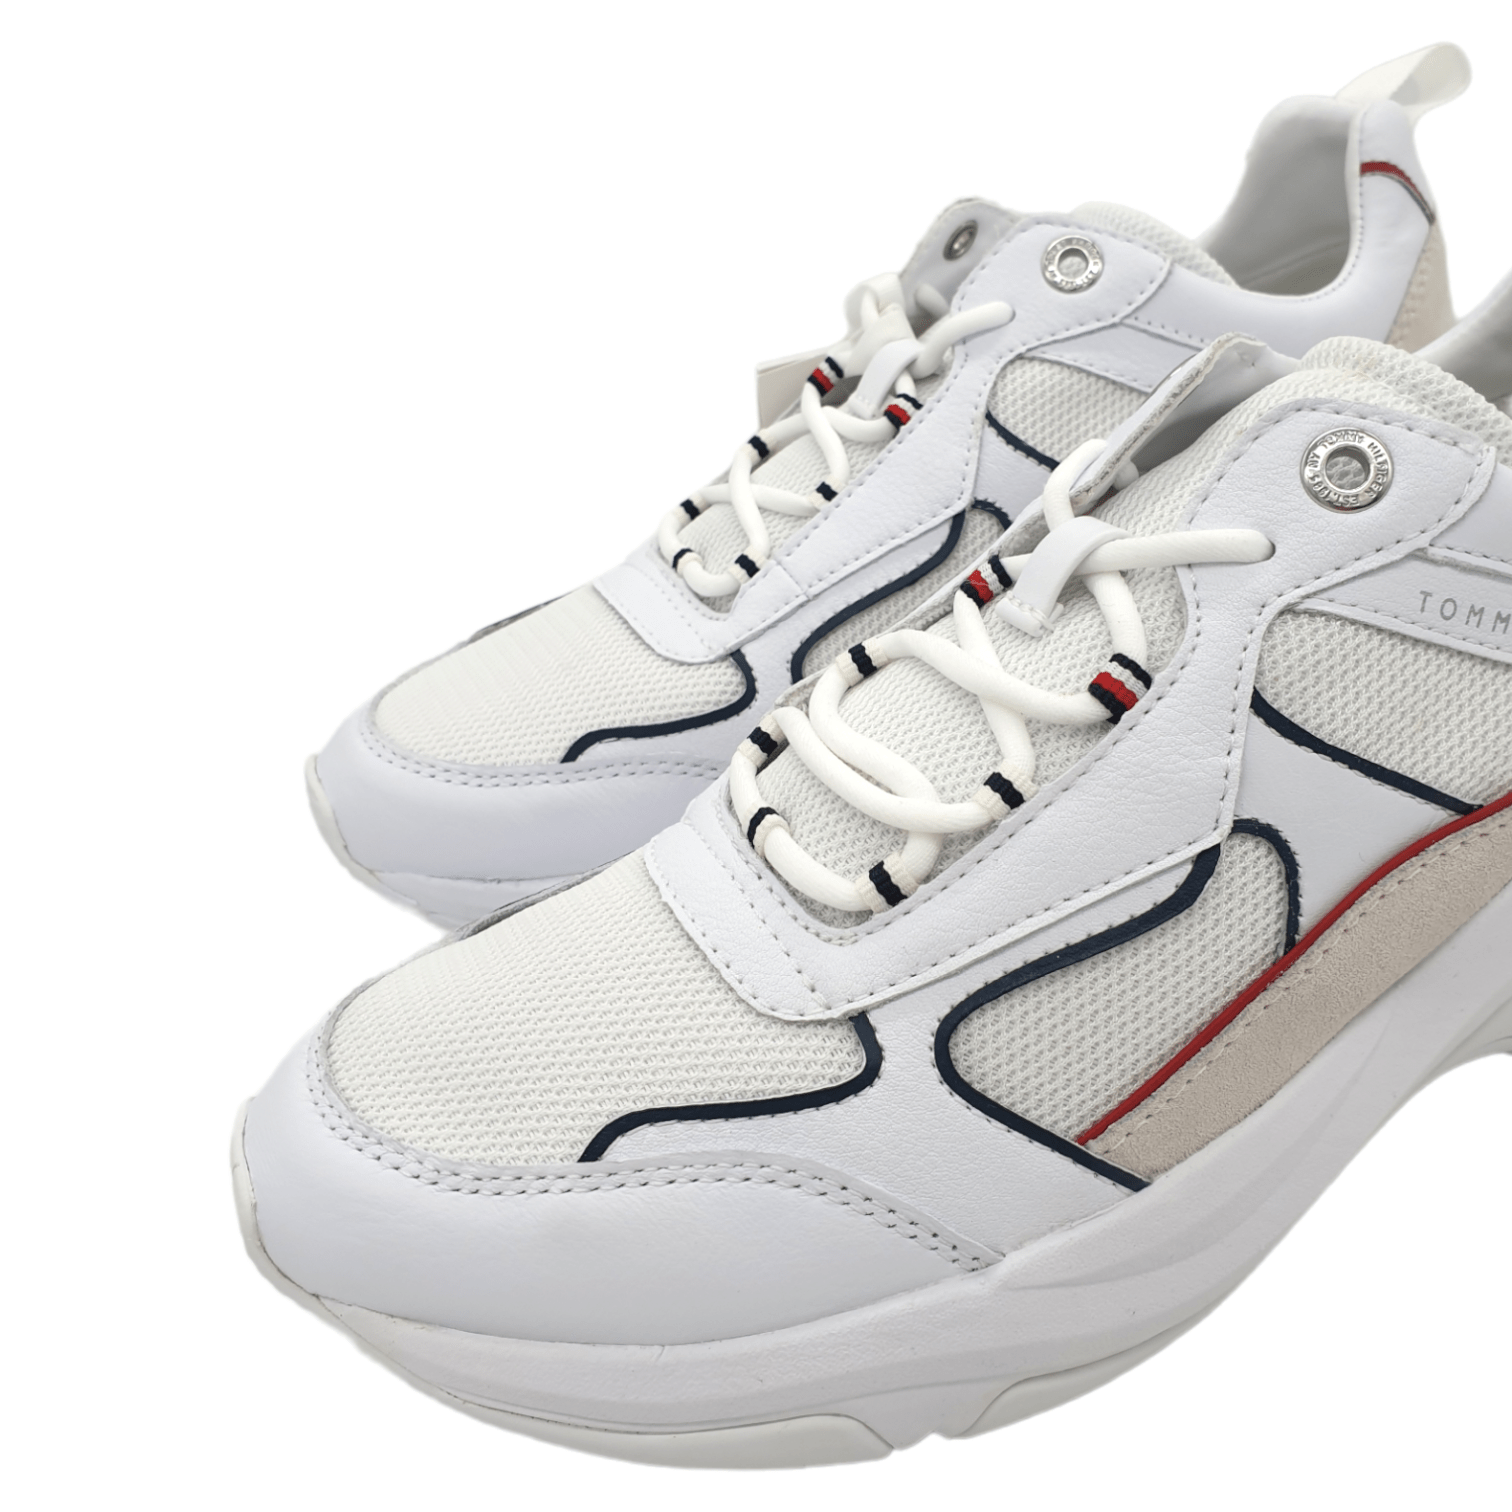 Tommy Hilfiger White & Cream Leather Trainers